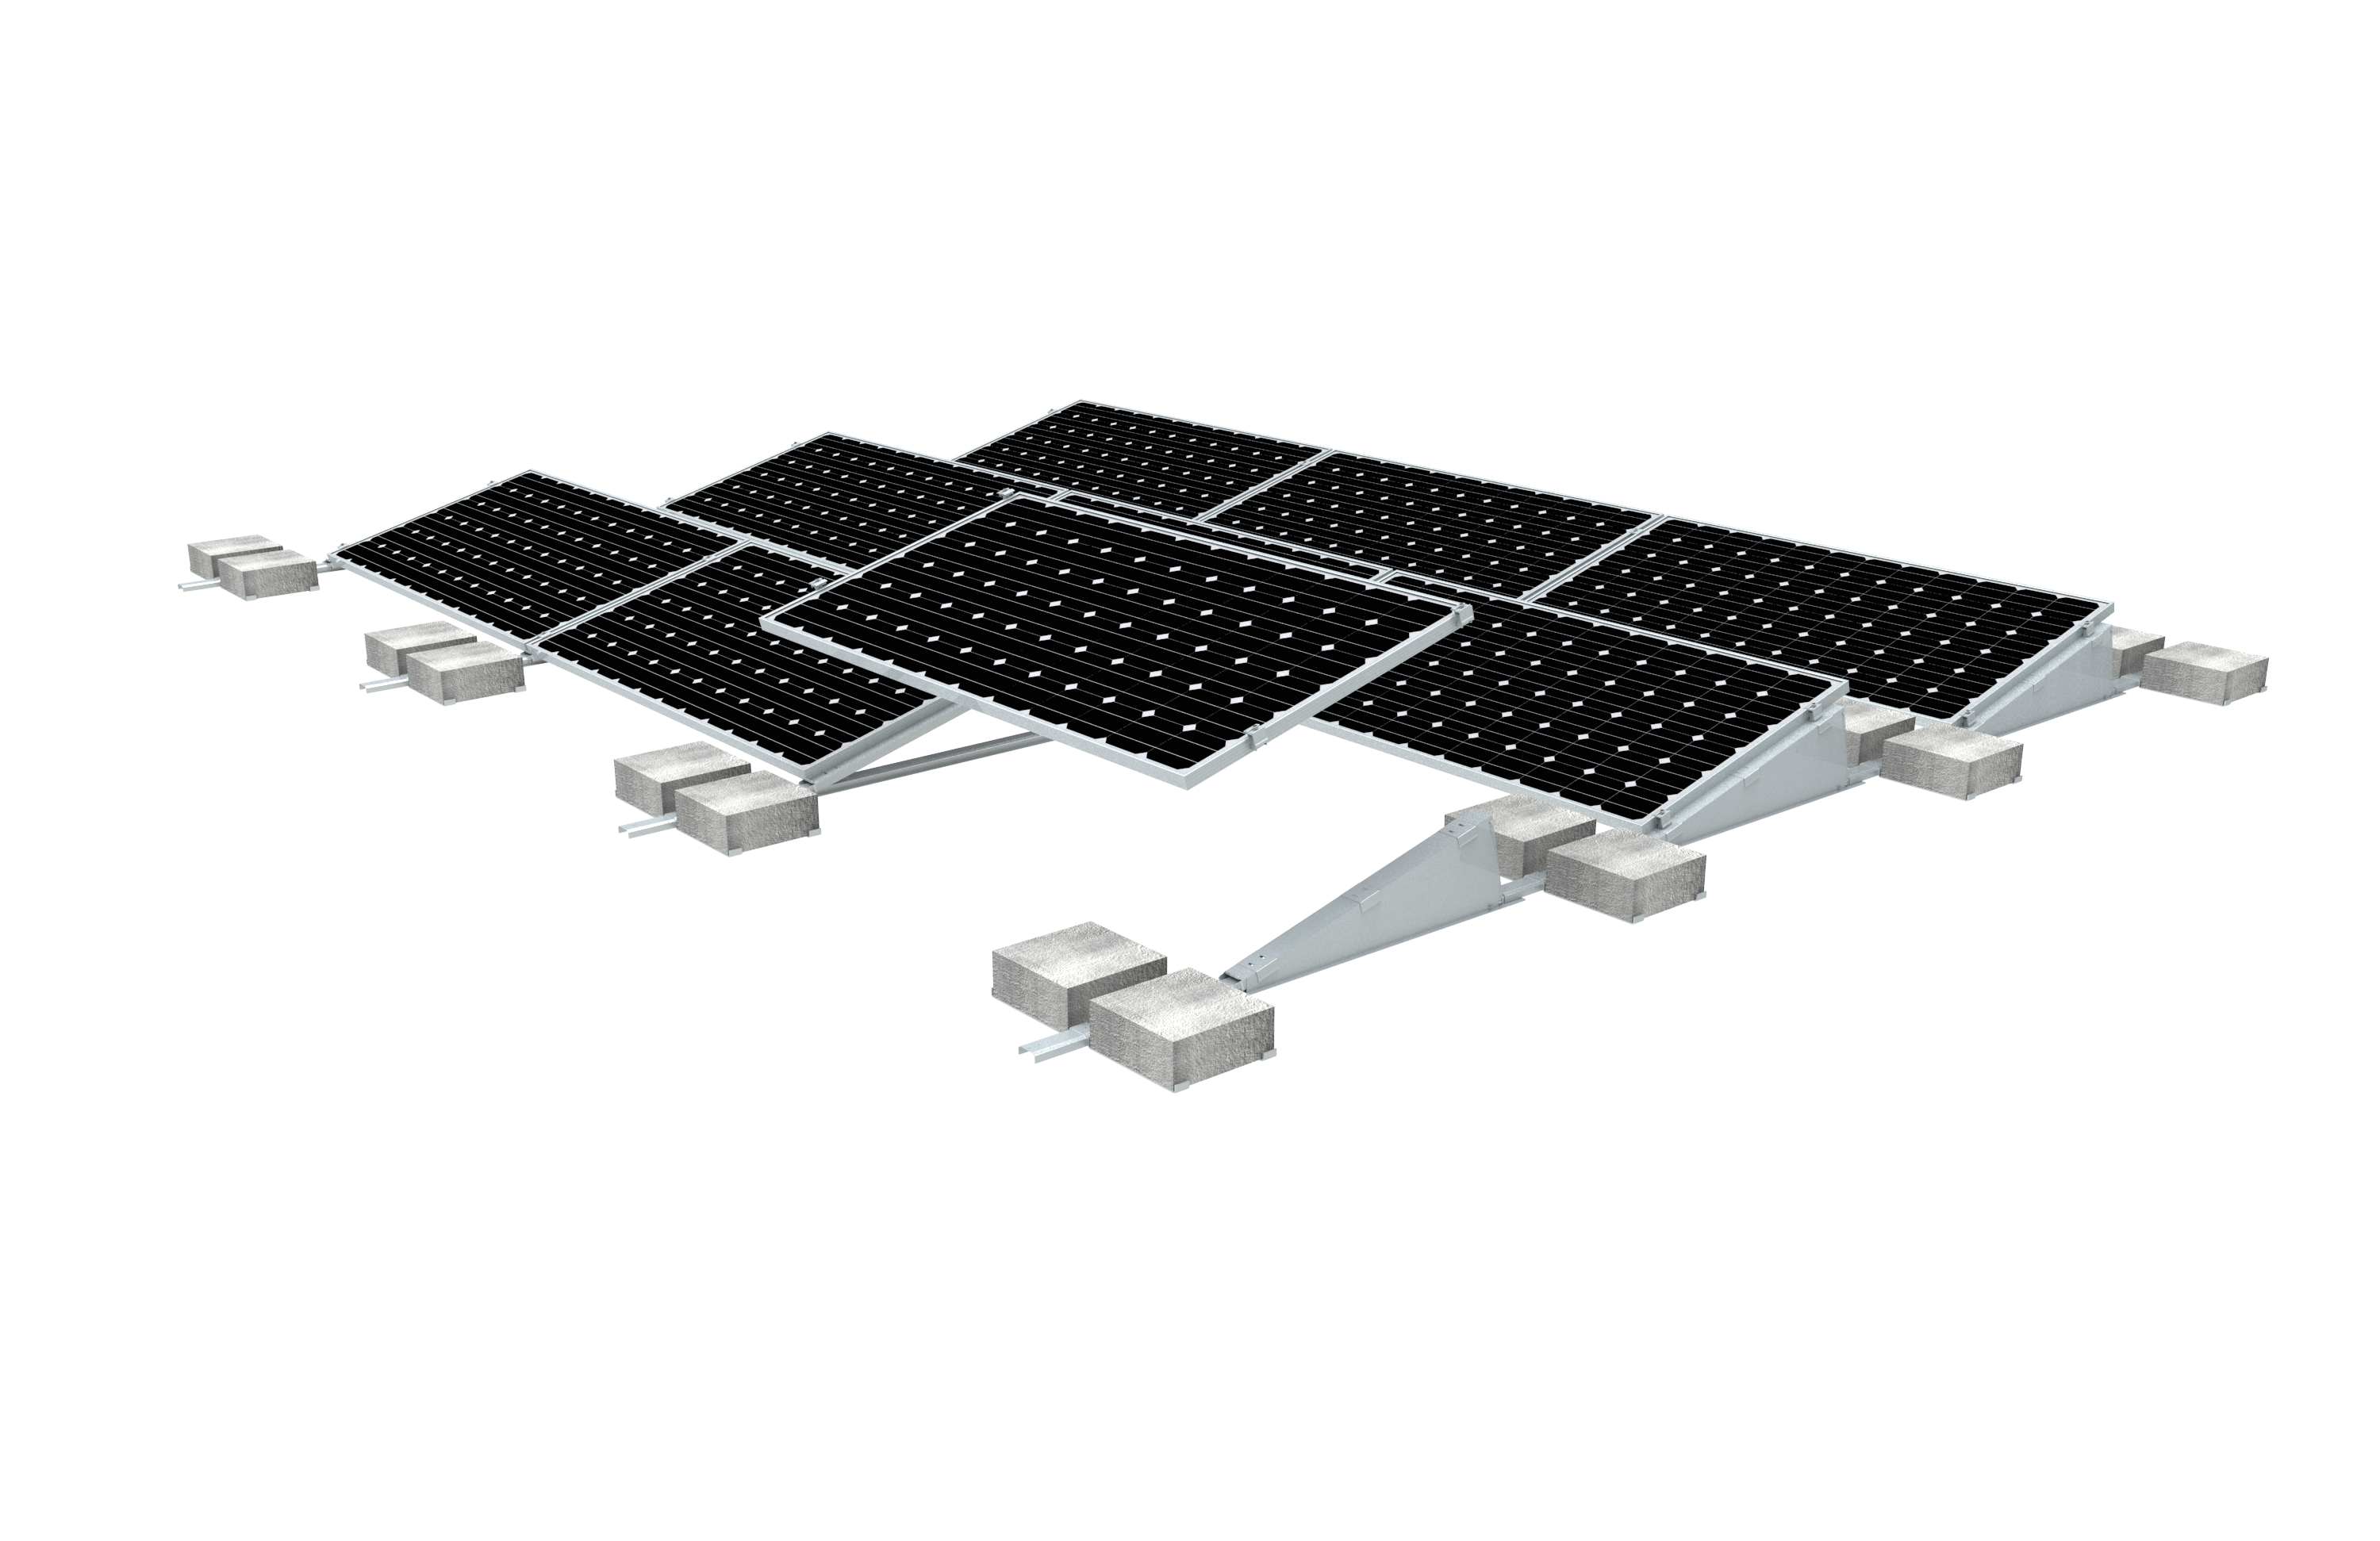 Do you know the installation method of such flat roof photovoltaic brackets?